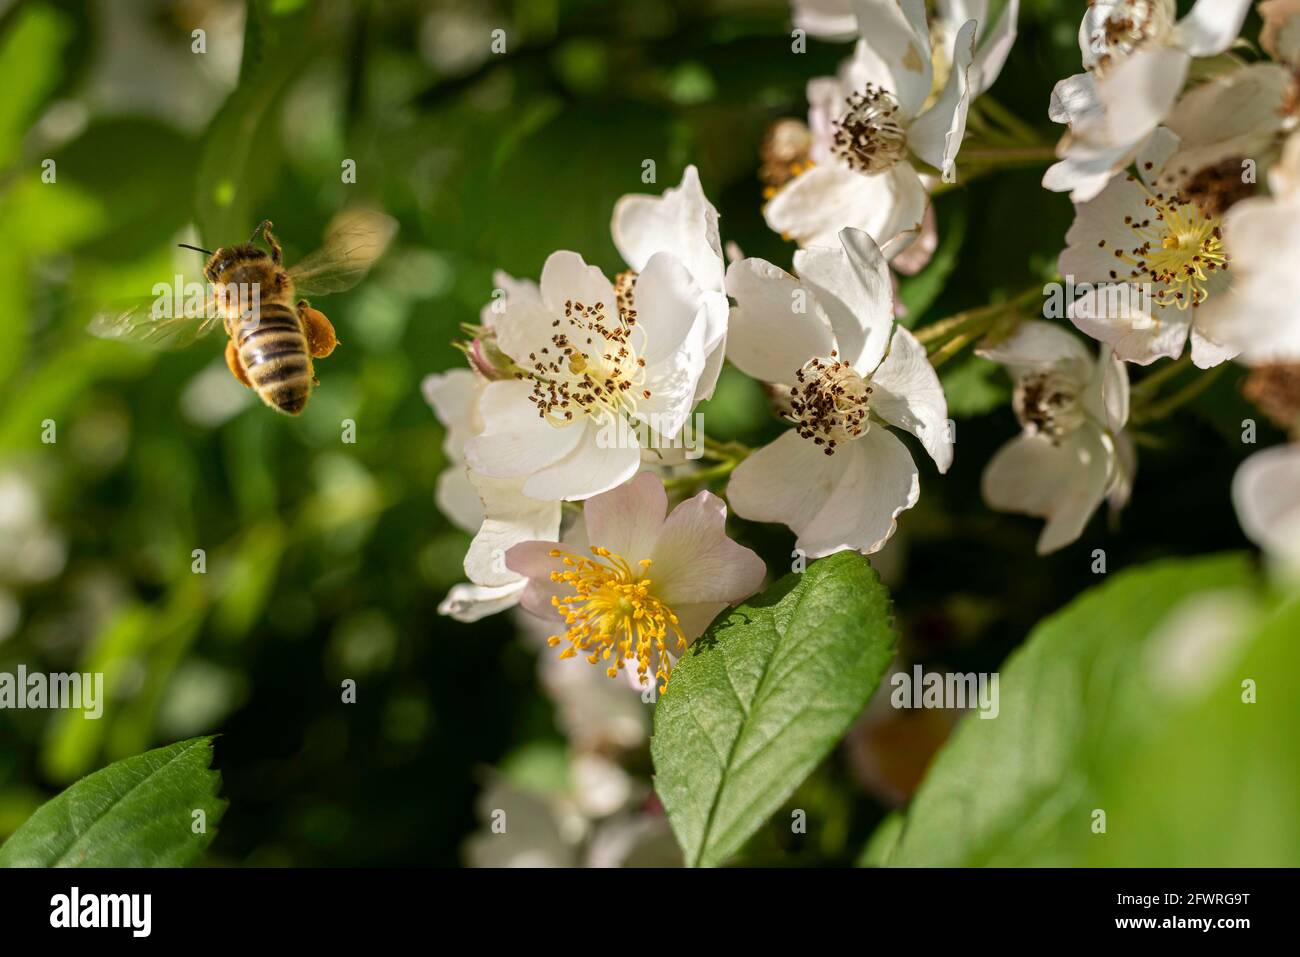 Honey bee flying away from Silky Rose flower during pollination. The bee has a lot of visible collected pollen on the legs. Stock Photo